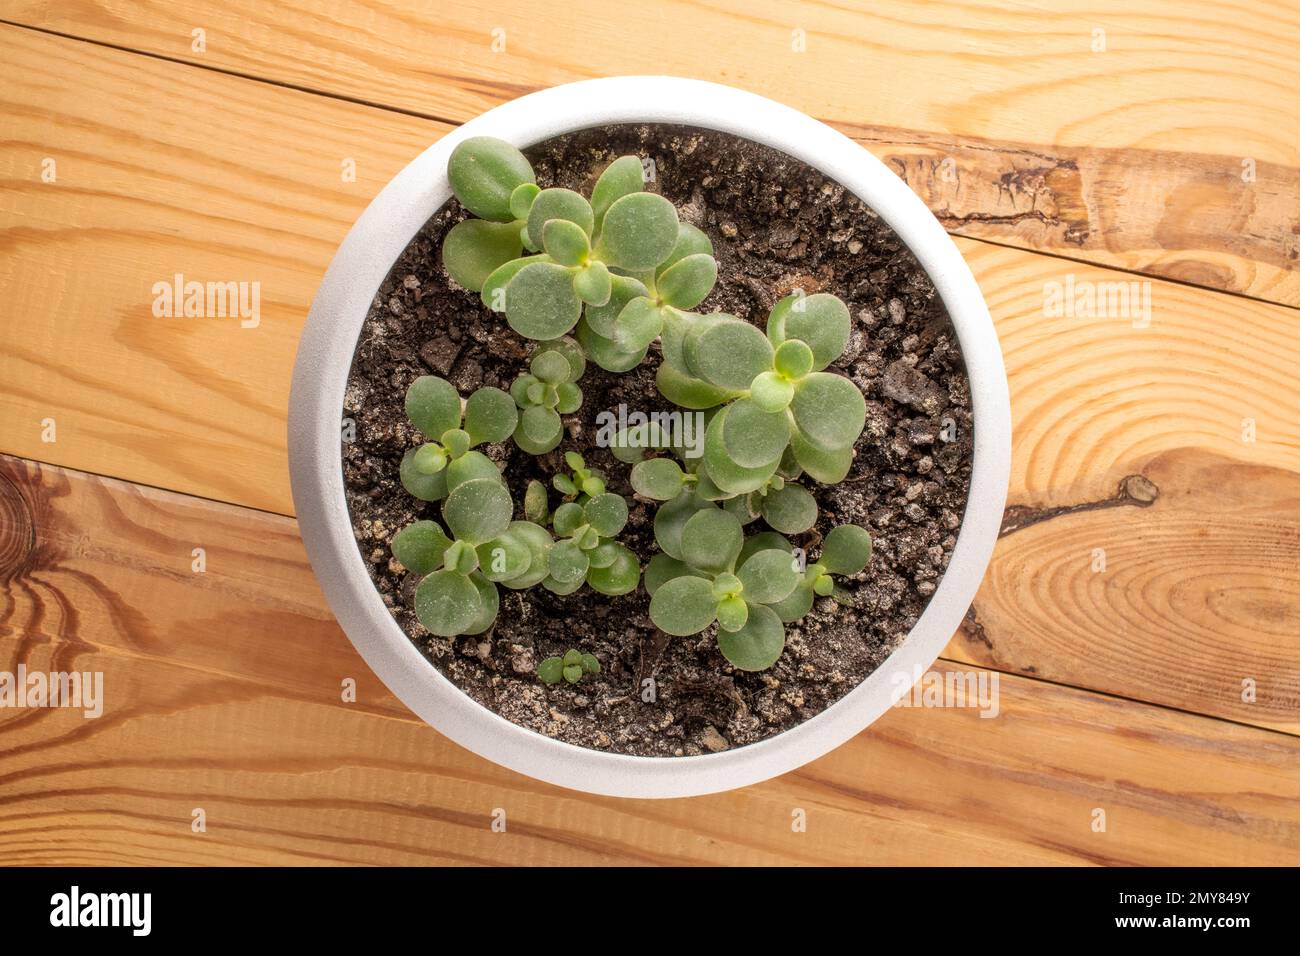 Homemade flower, Crassula ovata, in a ceramic pot on a wooden table, macro, top view. Stock Photo